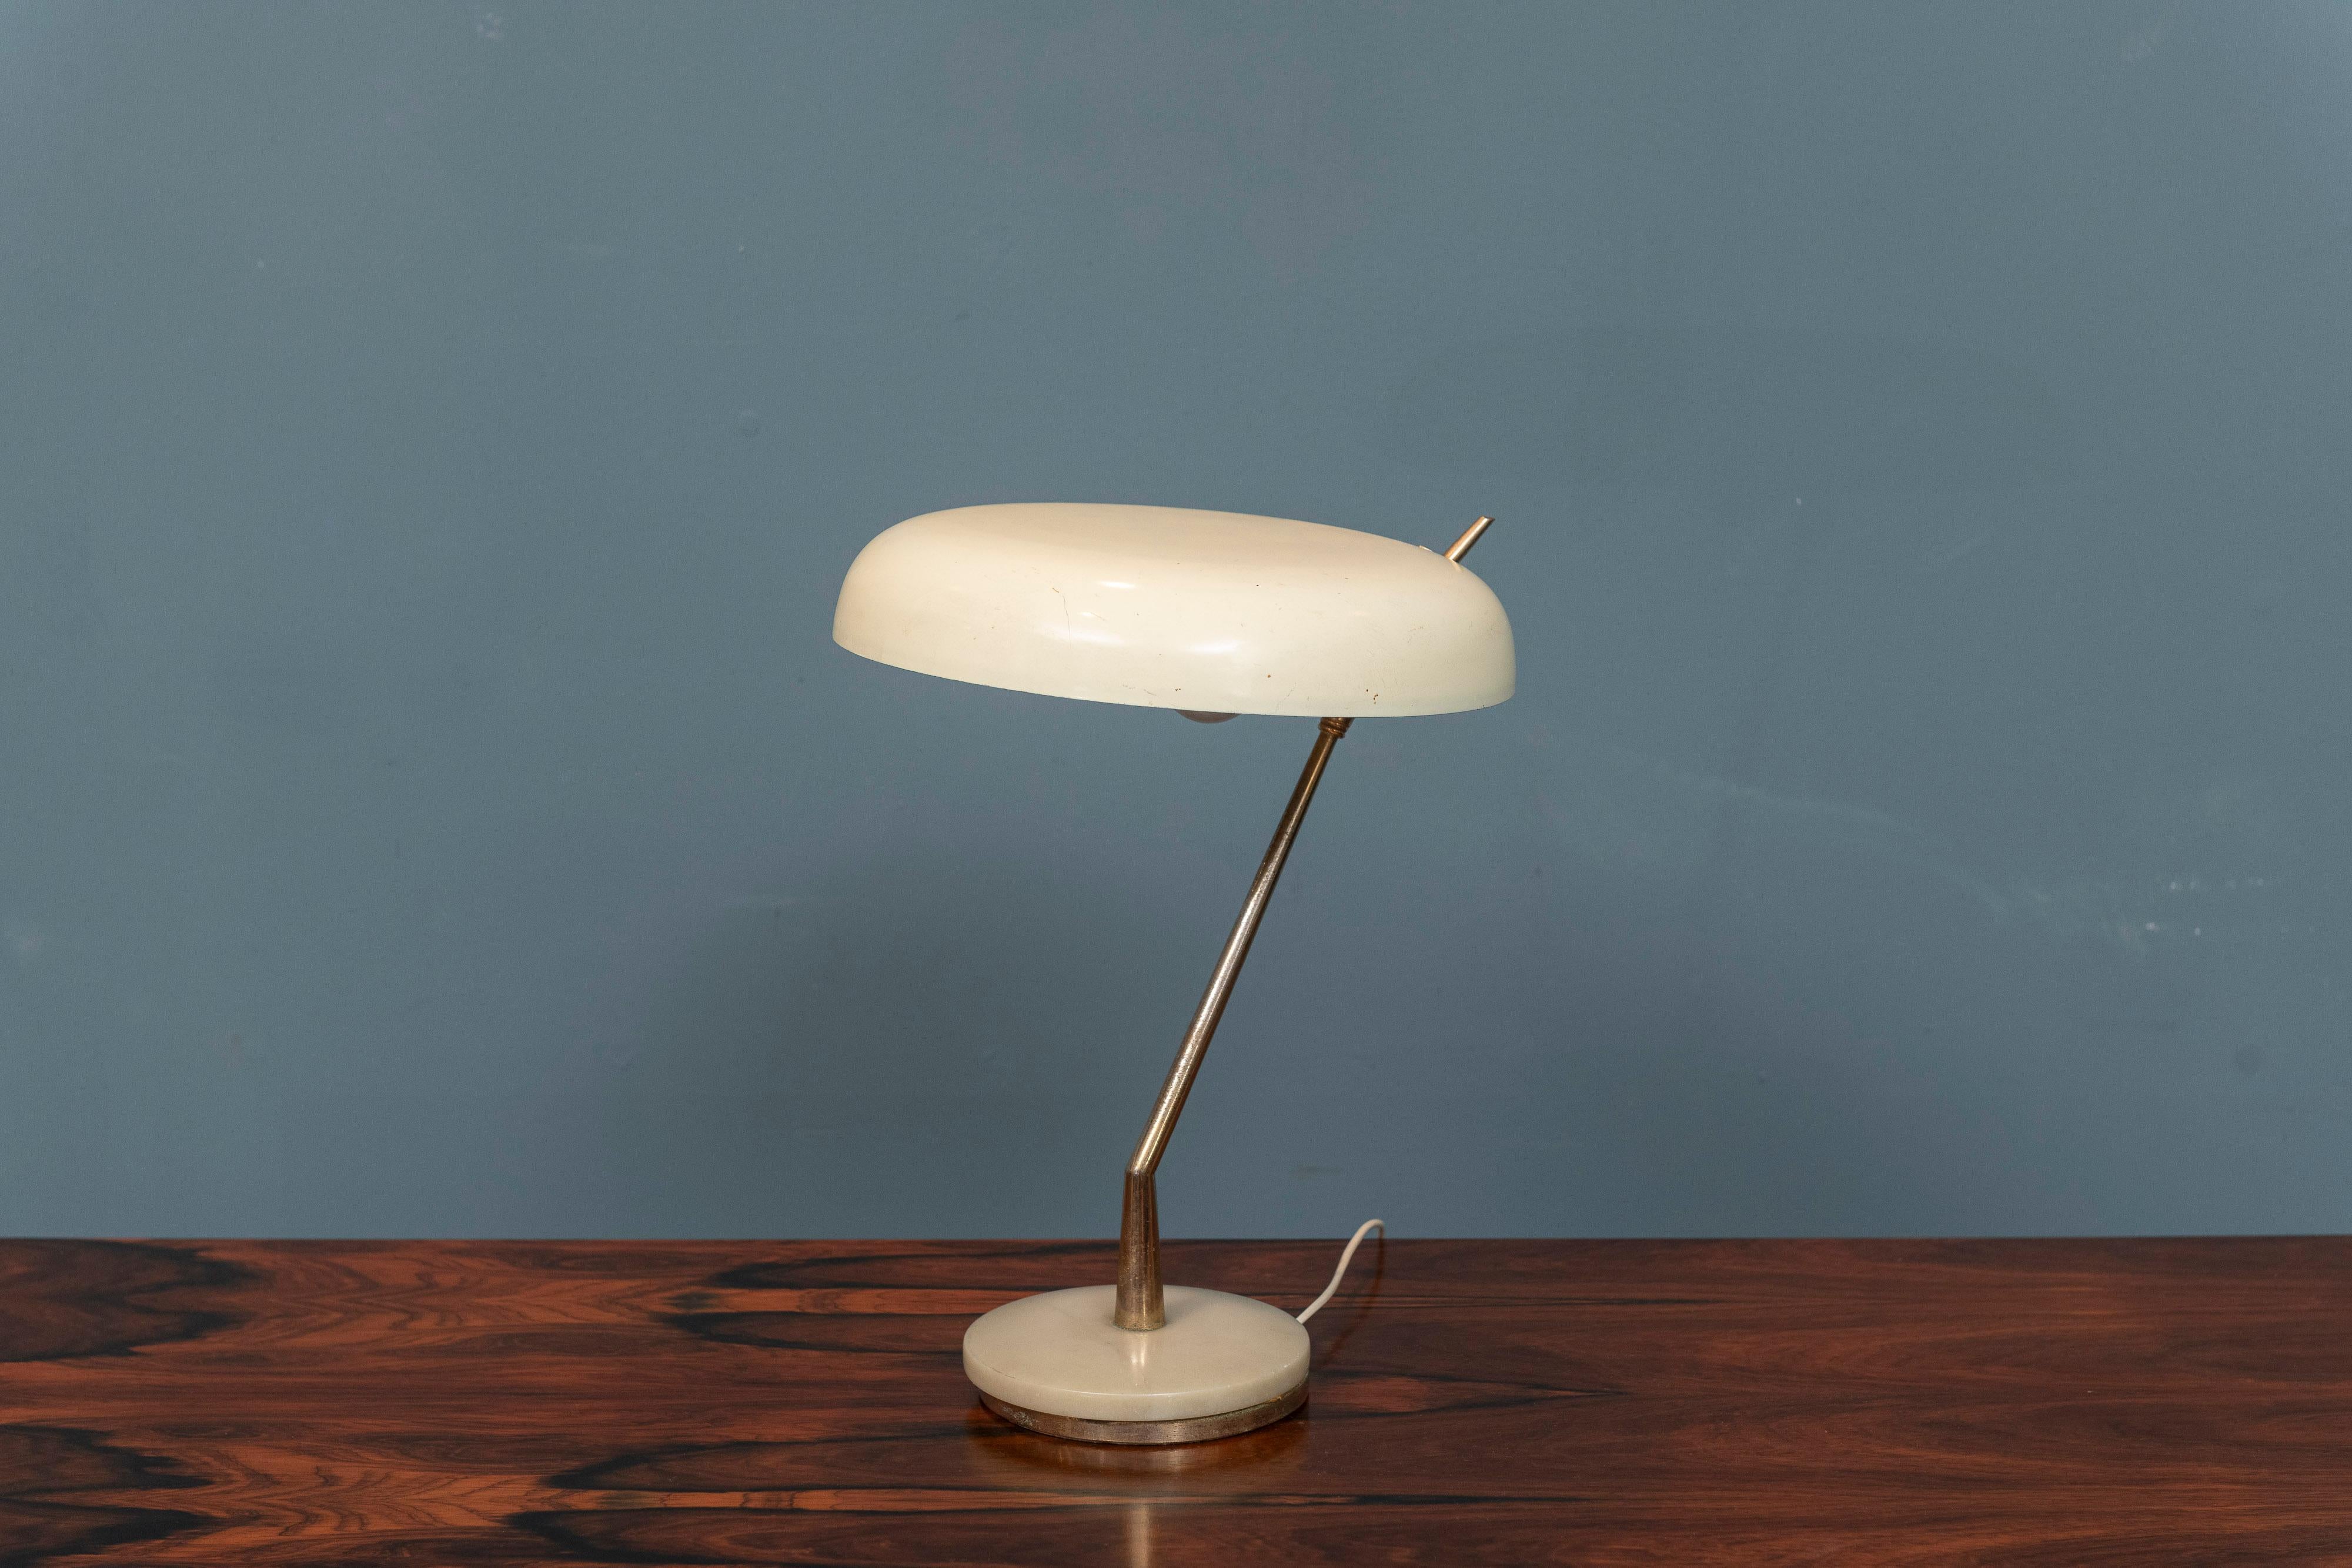 Mid-Century Italian desk or table lamp. Ivory enamel shade on an angular brass neck and marble base. Shade can be turned or directed as desired, a great desk or nightstand lamp. In very good original working condition, adaptor included for US